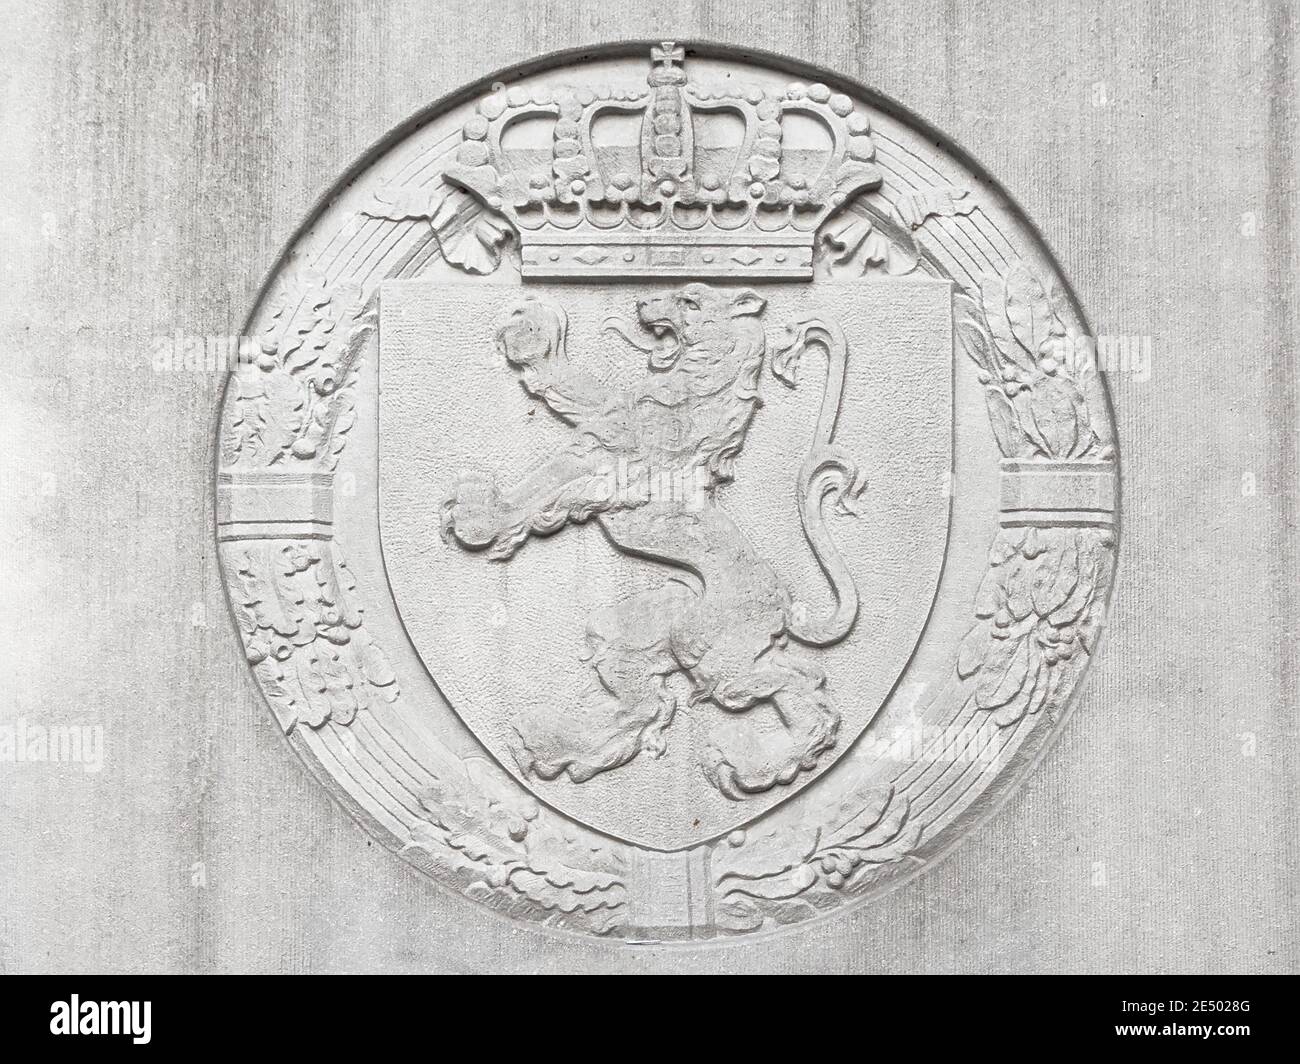 Bas relief stone carving of coat of arms of belgium, with lion, crown and laurels Stock Photo